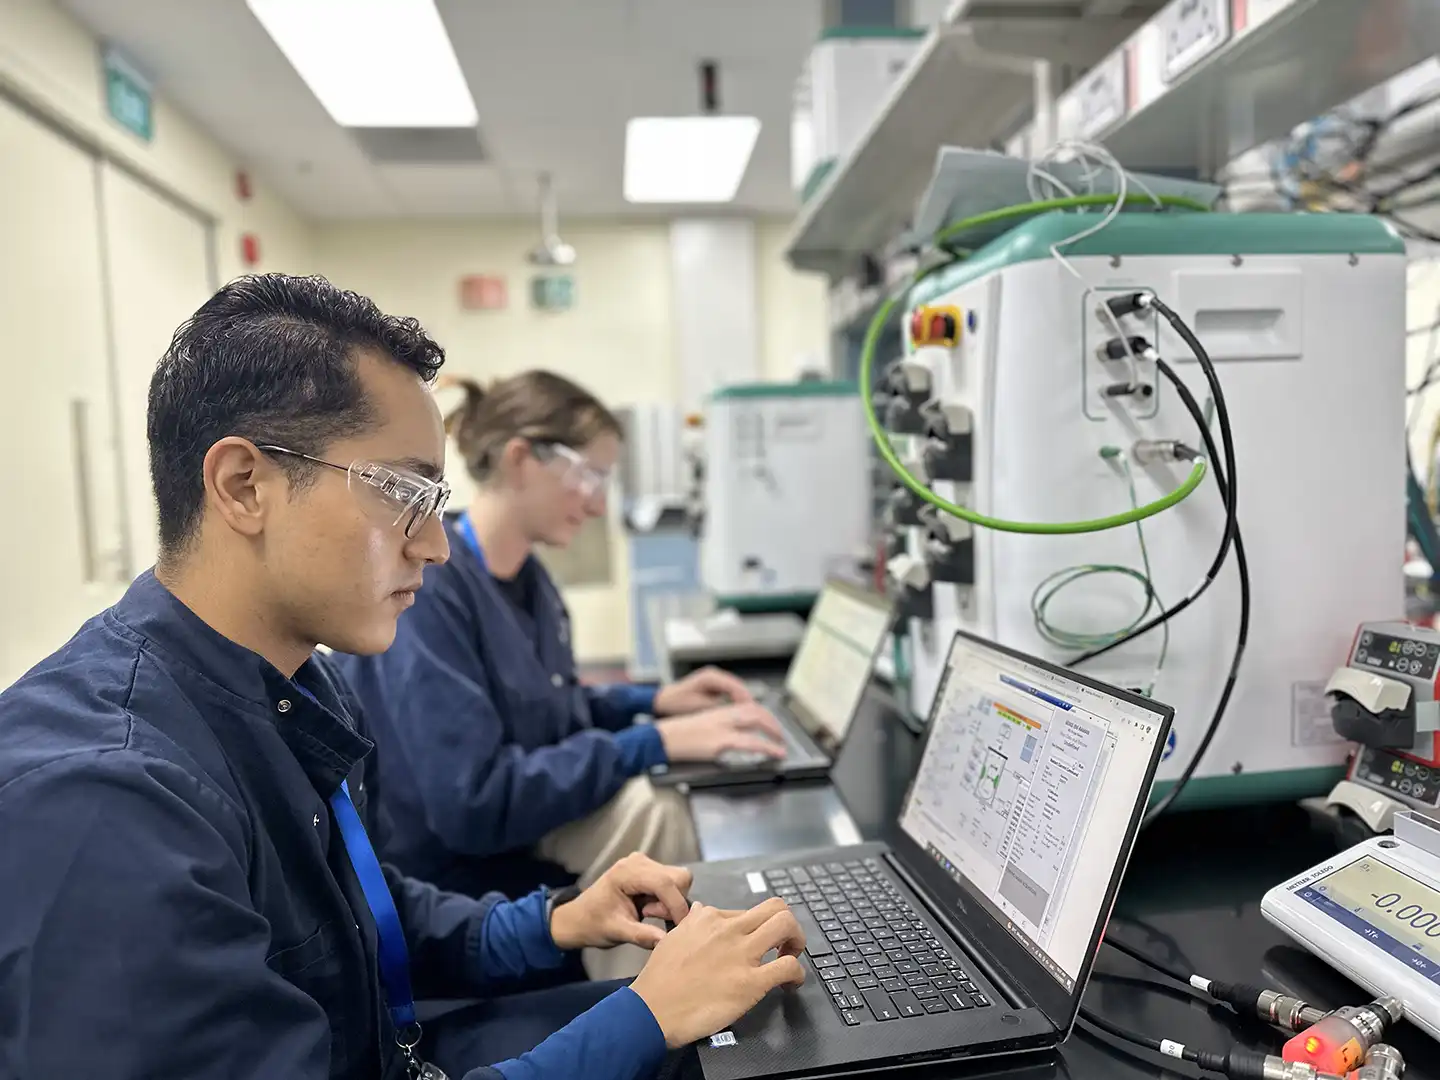 Global Service team members performing aftermarket services on an AES bioprocess controller, specifically a Site Acceptance Test (SAT)